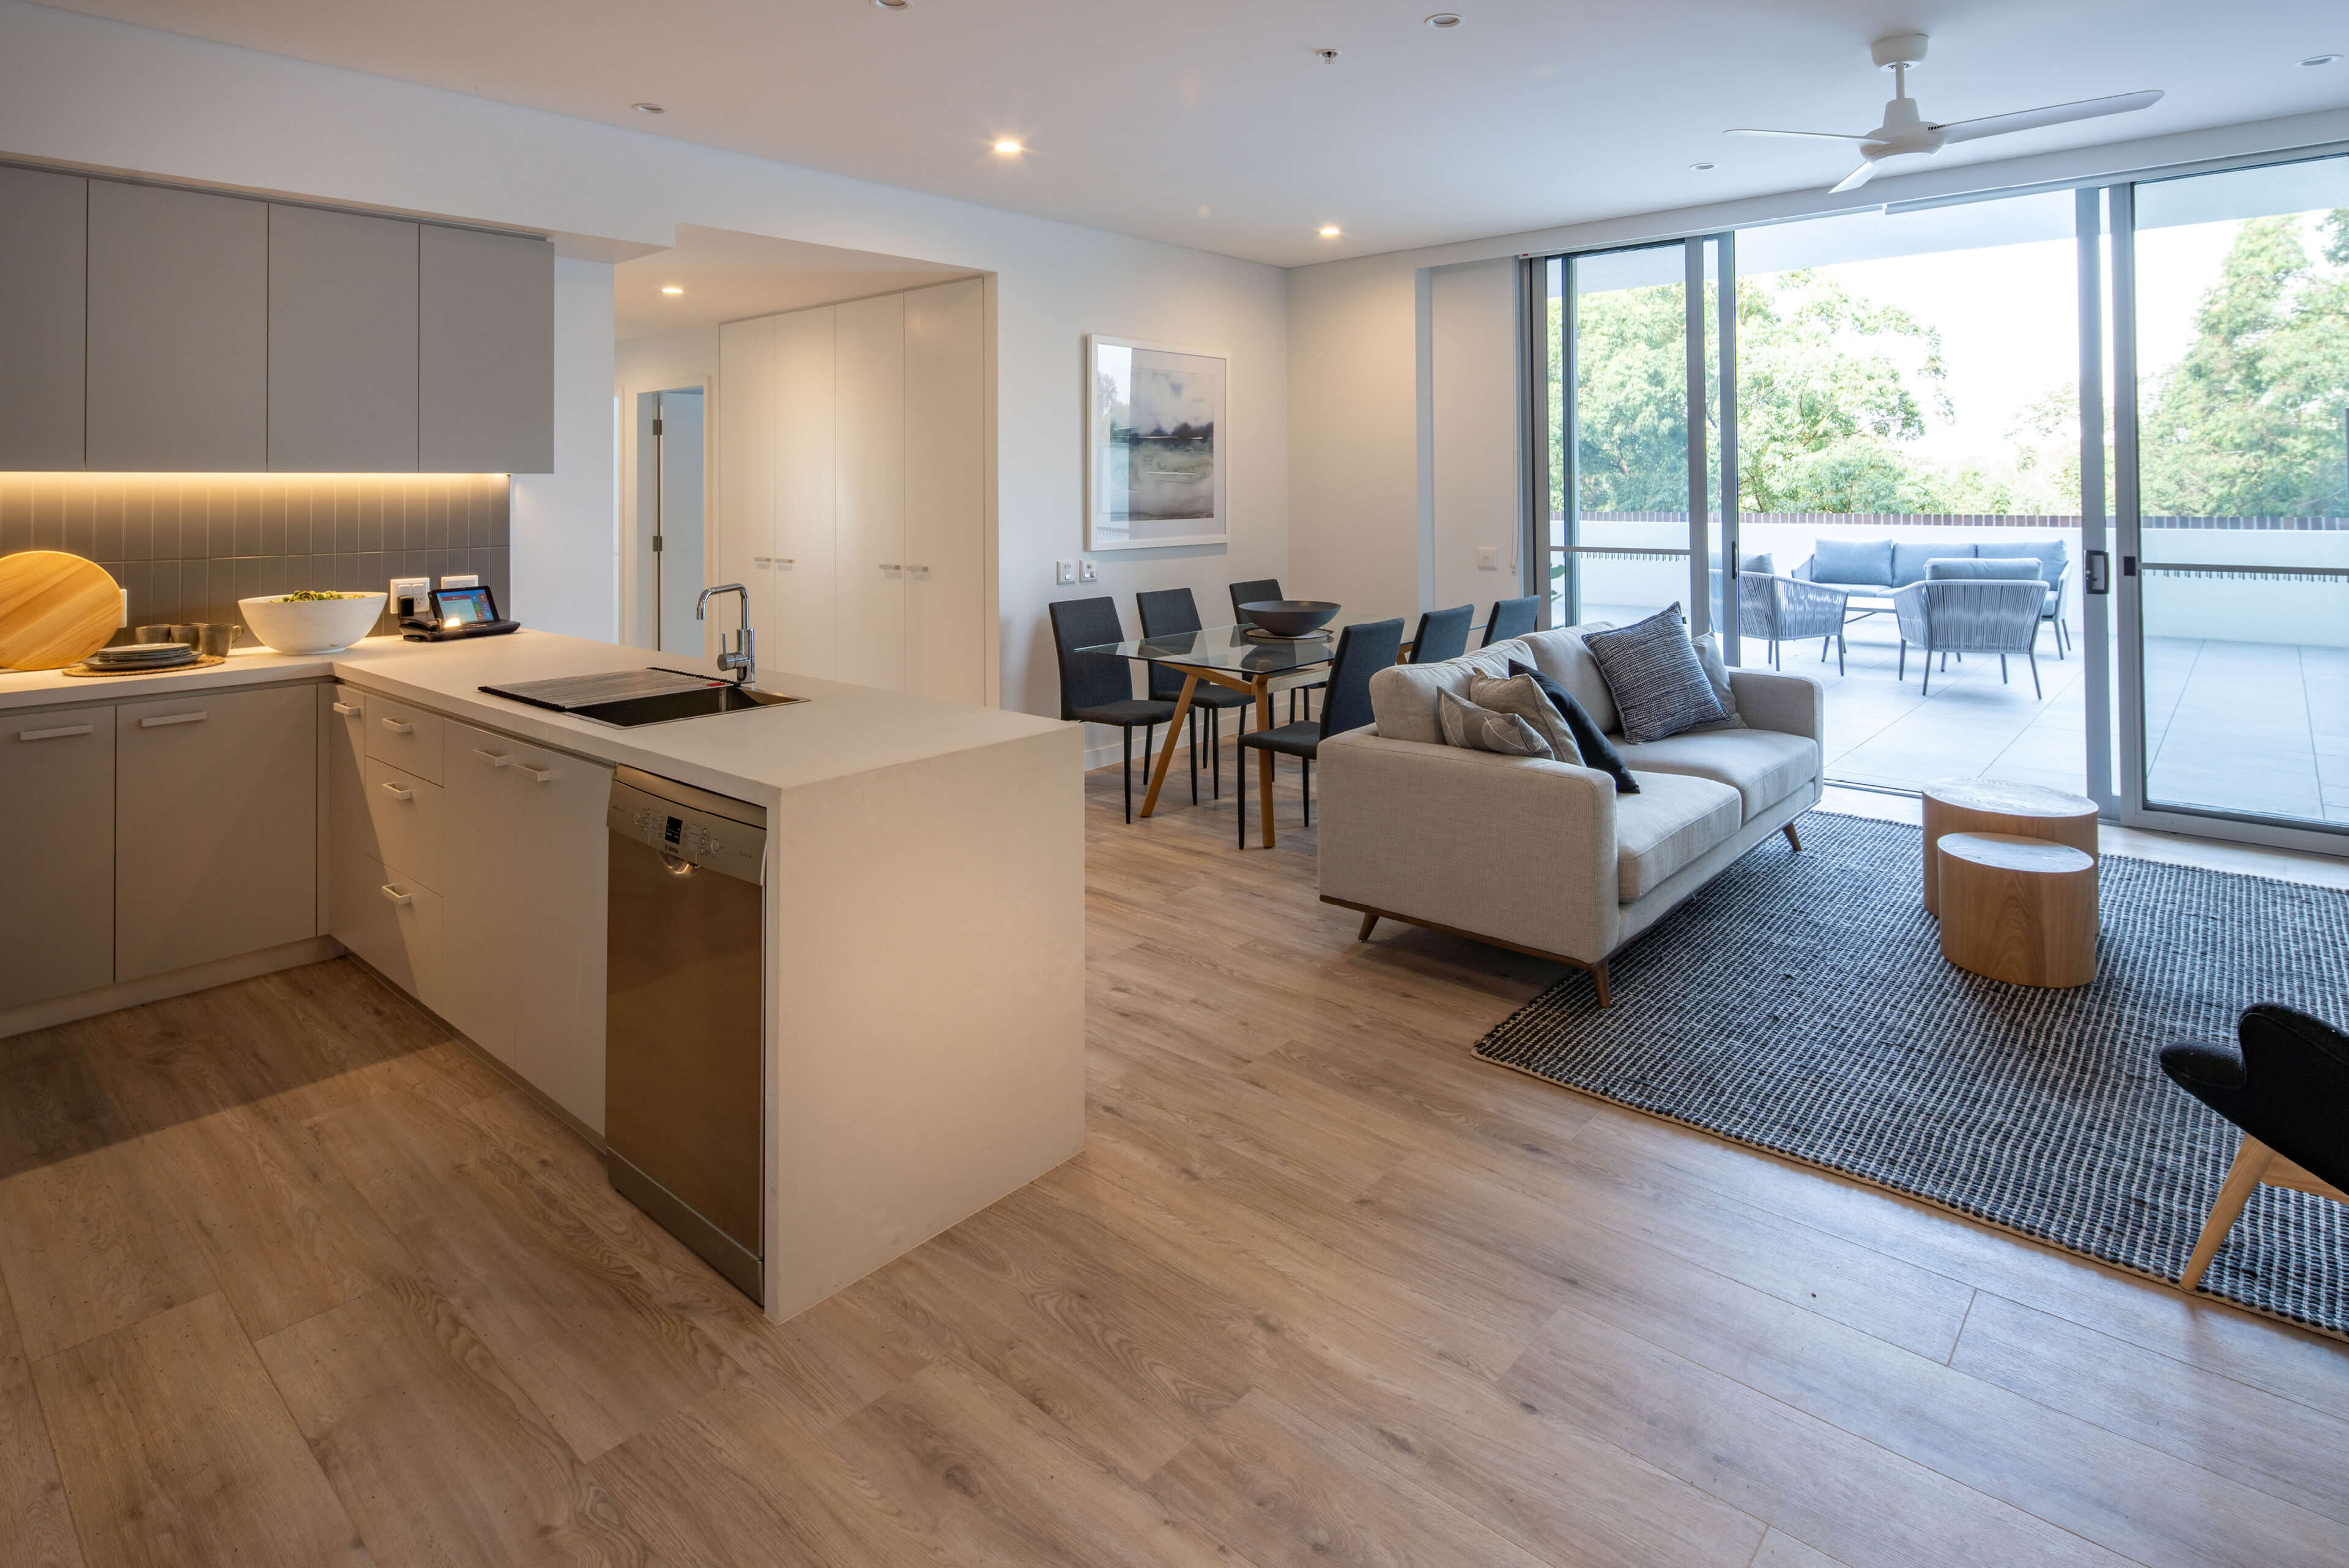 21 interior kitchen overlooking lounge independent living unit at uniting mayflower westmead taylor construction aged care